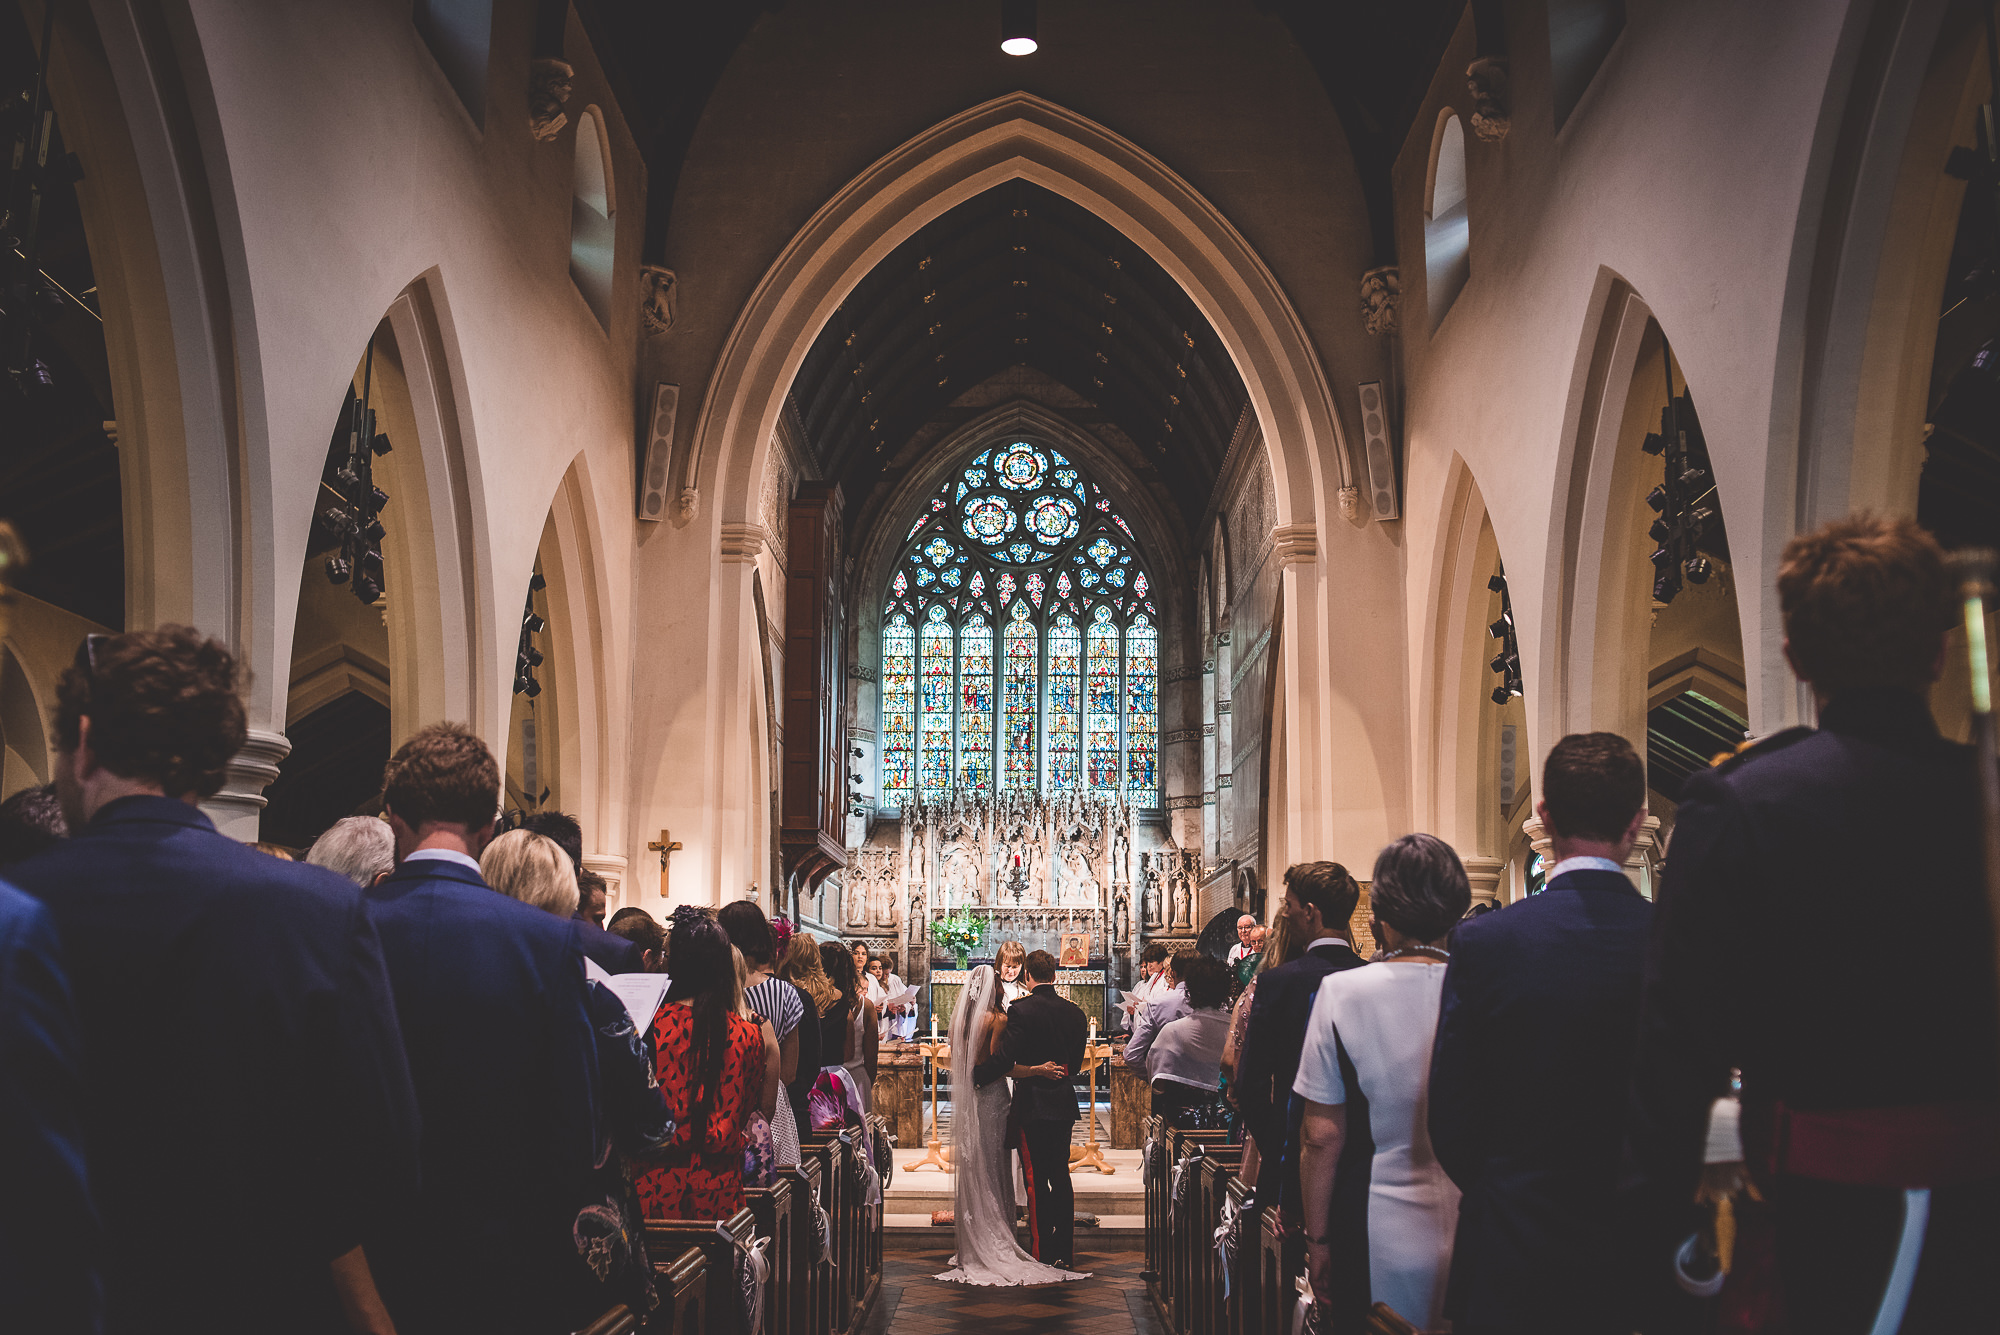 A bride and groom's wedding photo, captured as they walk down the aisle of a church.